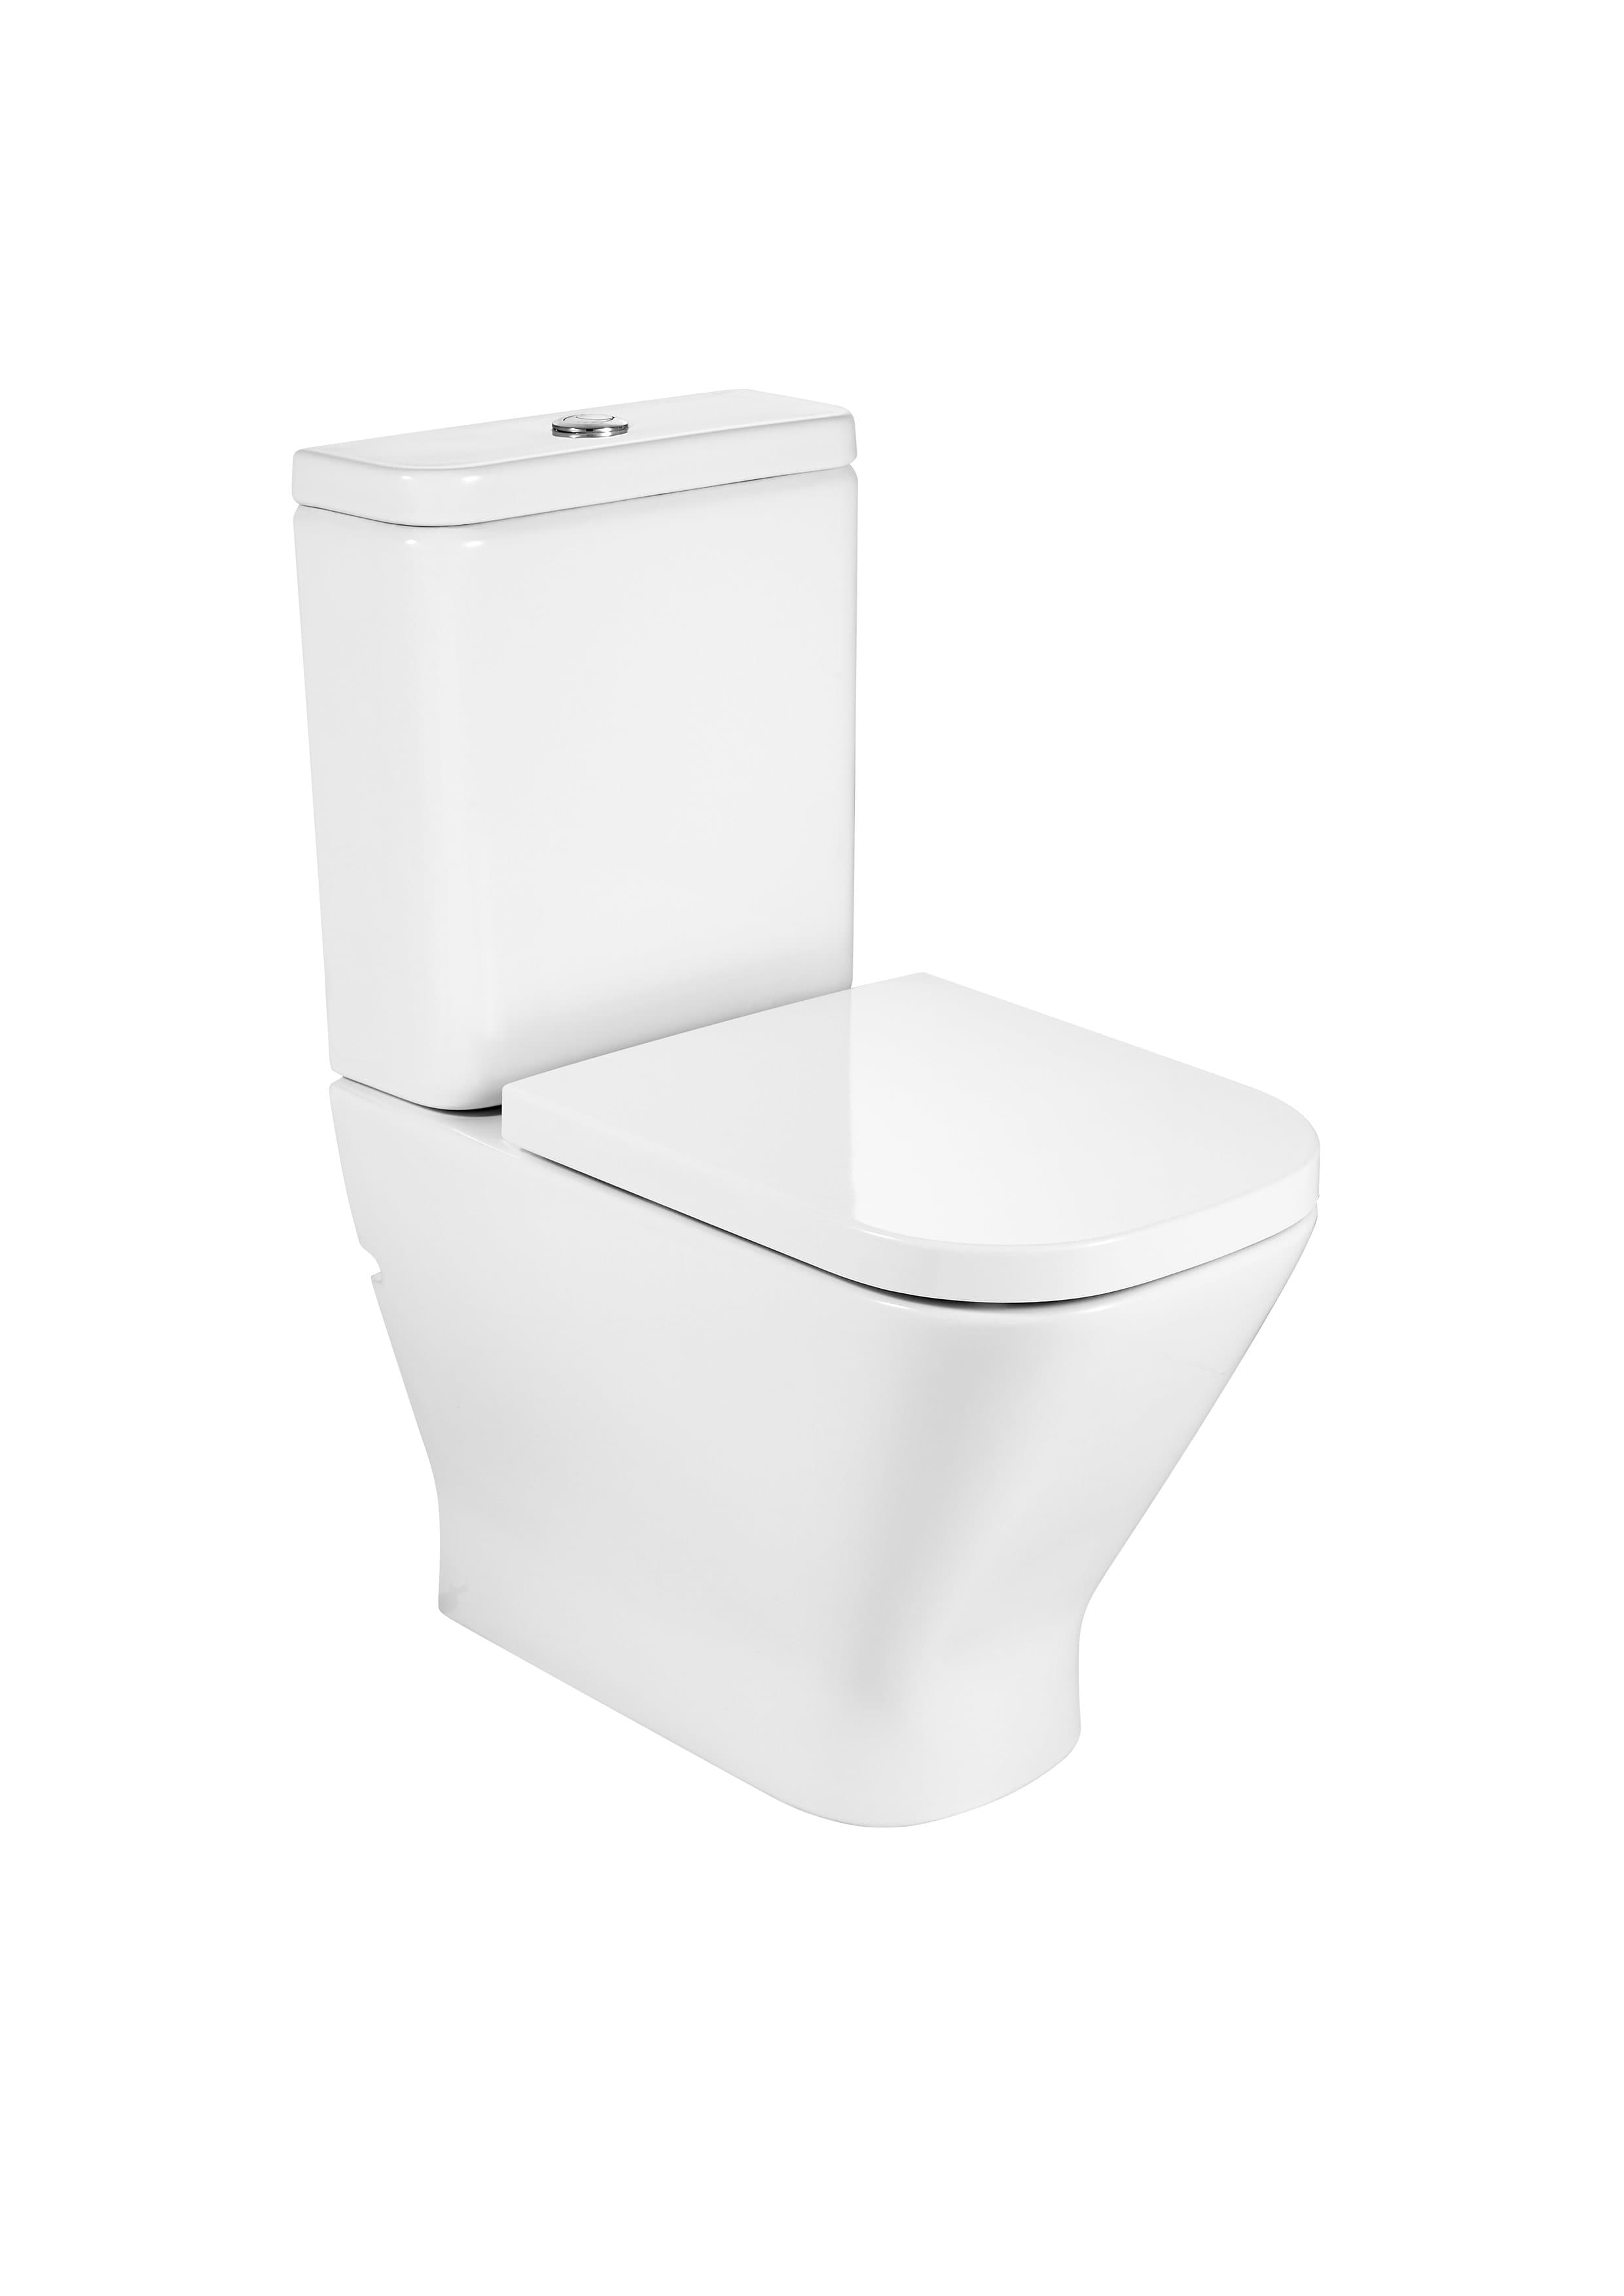 SQUARE - Compact back to wall vitreous china Rimless close-coupled WC with dual outlet Roca A34273700H